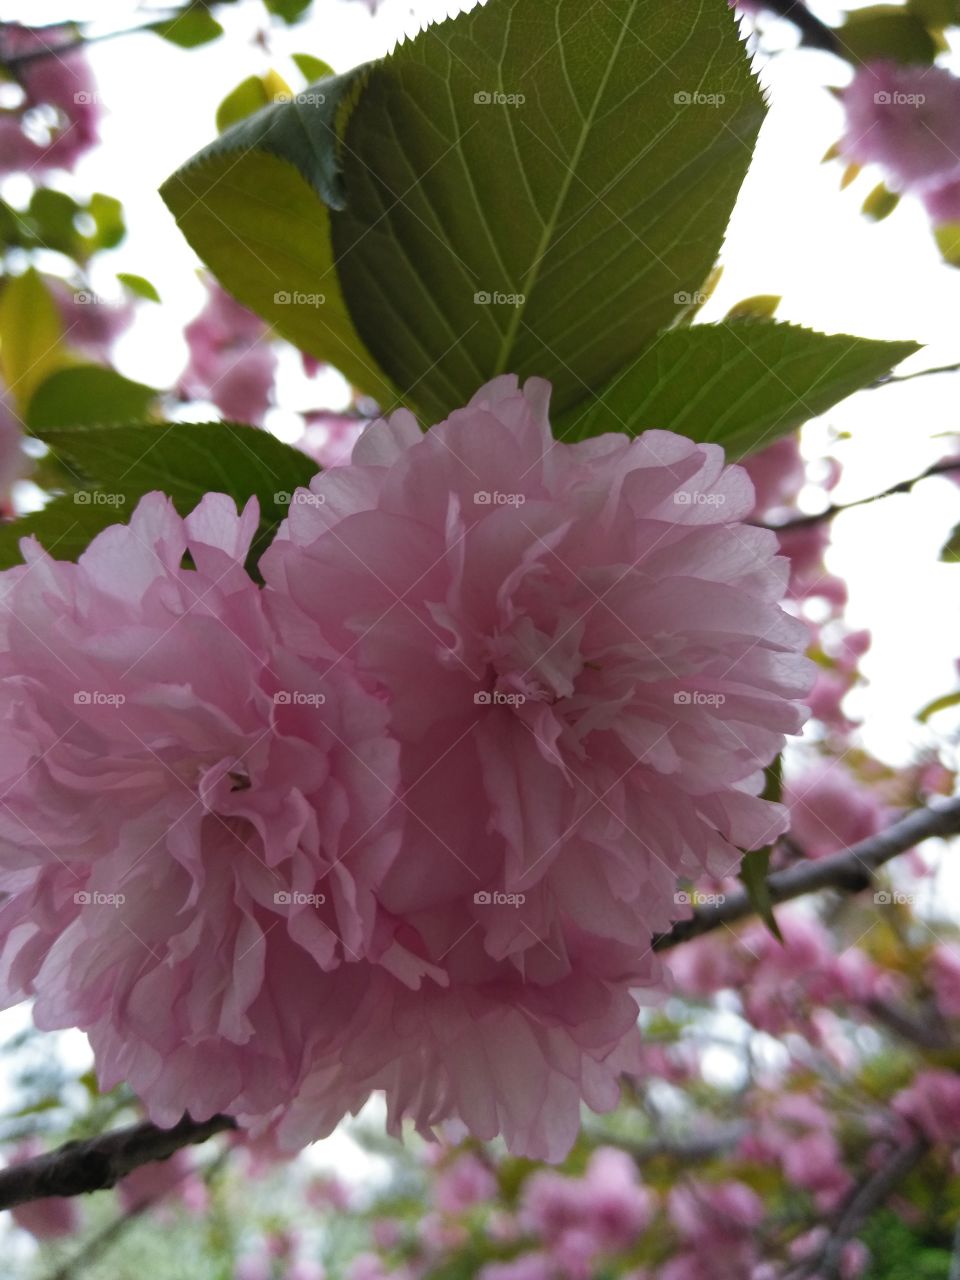 Delicate carnationlike pink flowers blooming overhead on massive tree on cloudy spring day.